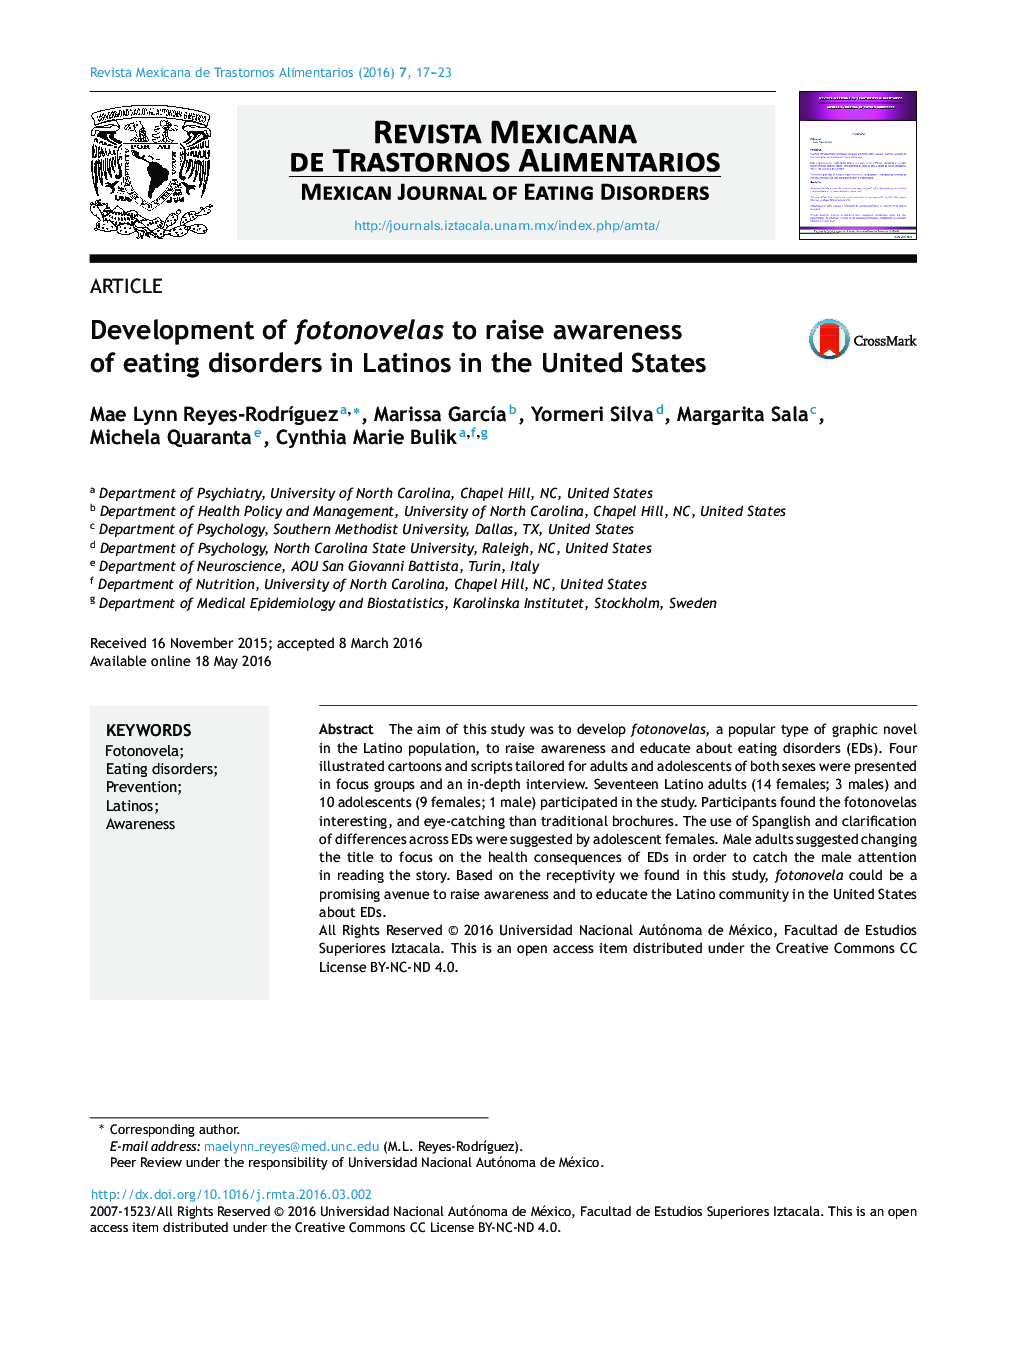 Development of fotonovelas to raise awareness of eating disorders in Latinos in the United States 